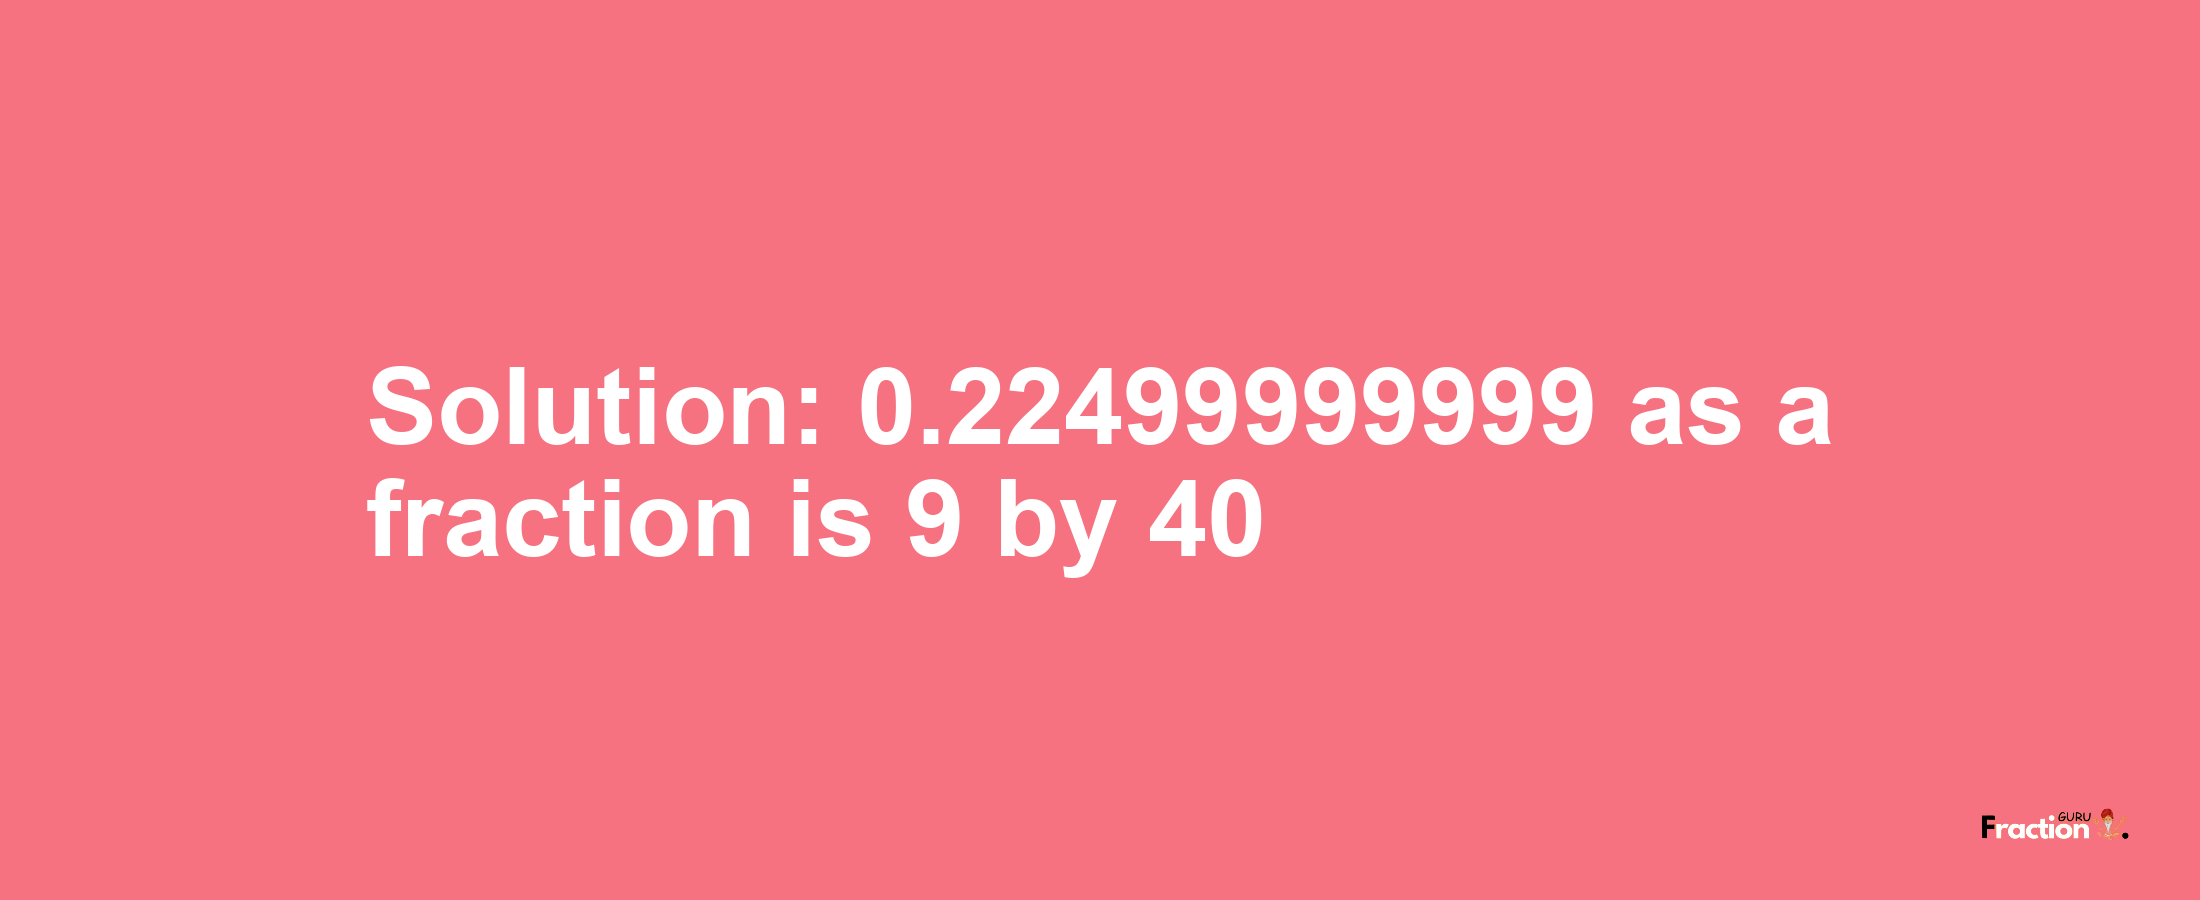 Solution:0.22499999999 as a fraction is 9/40